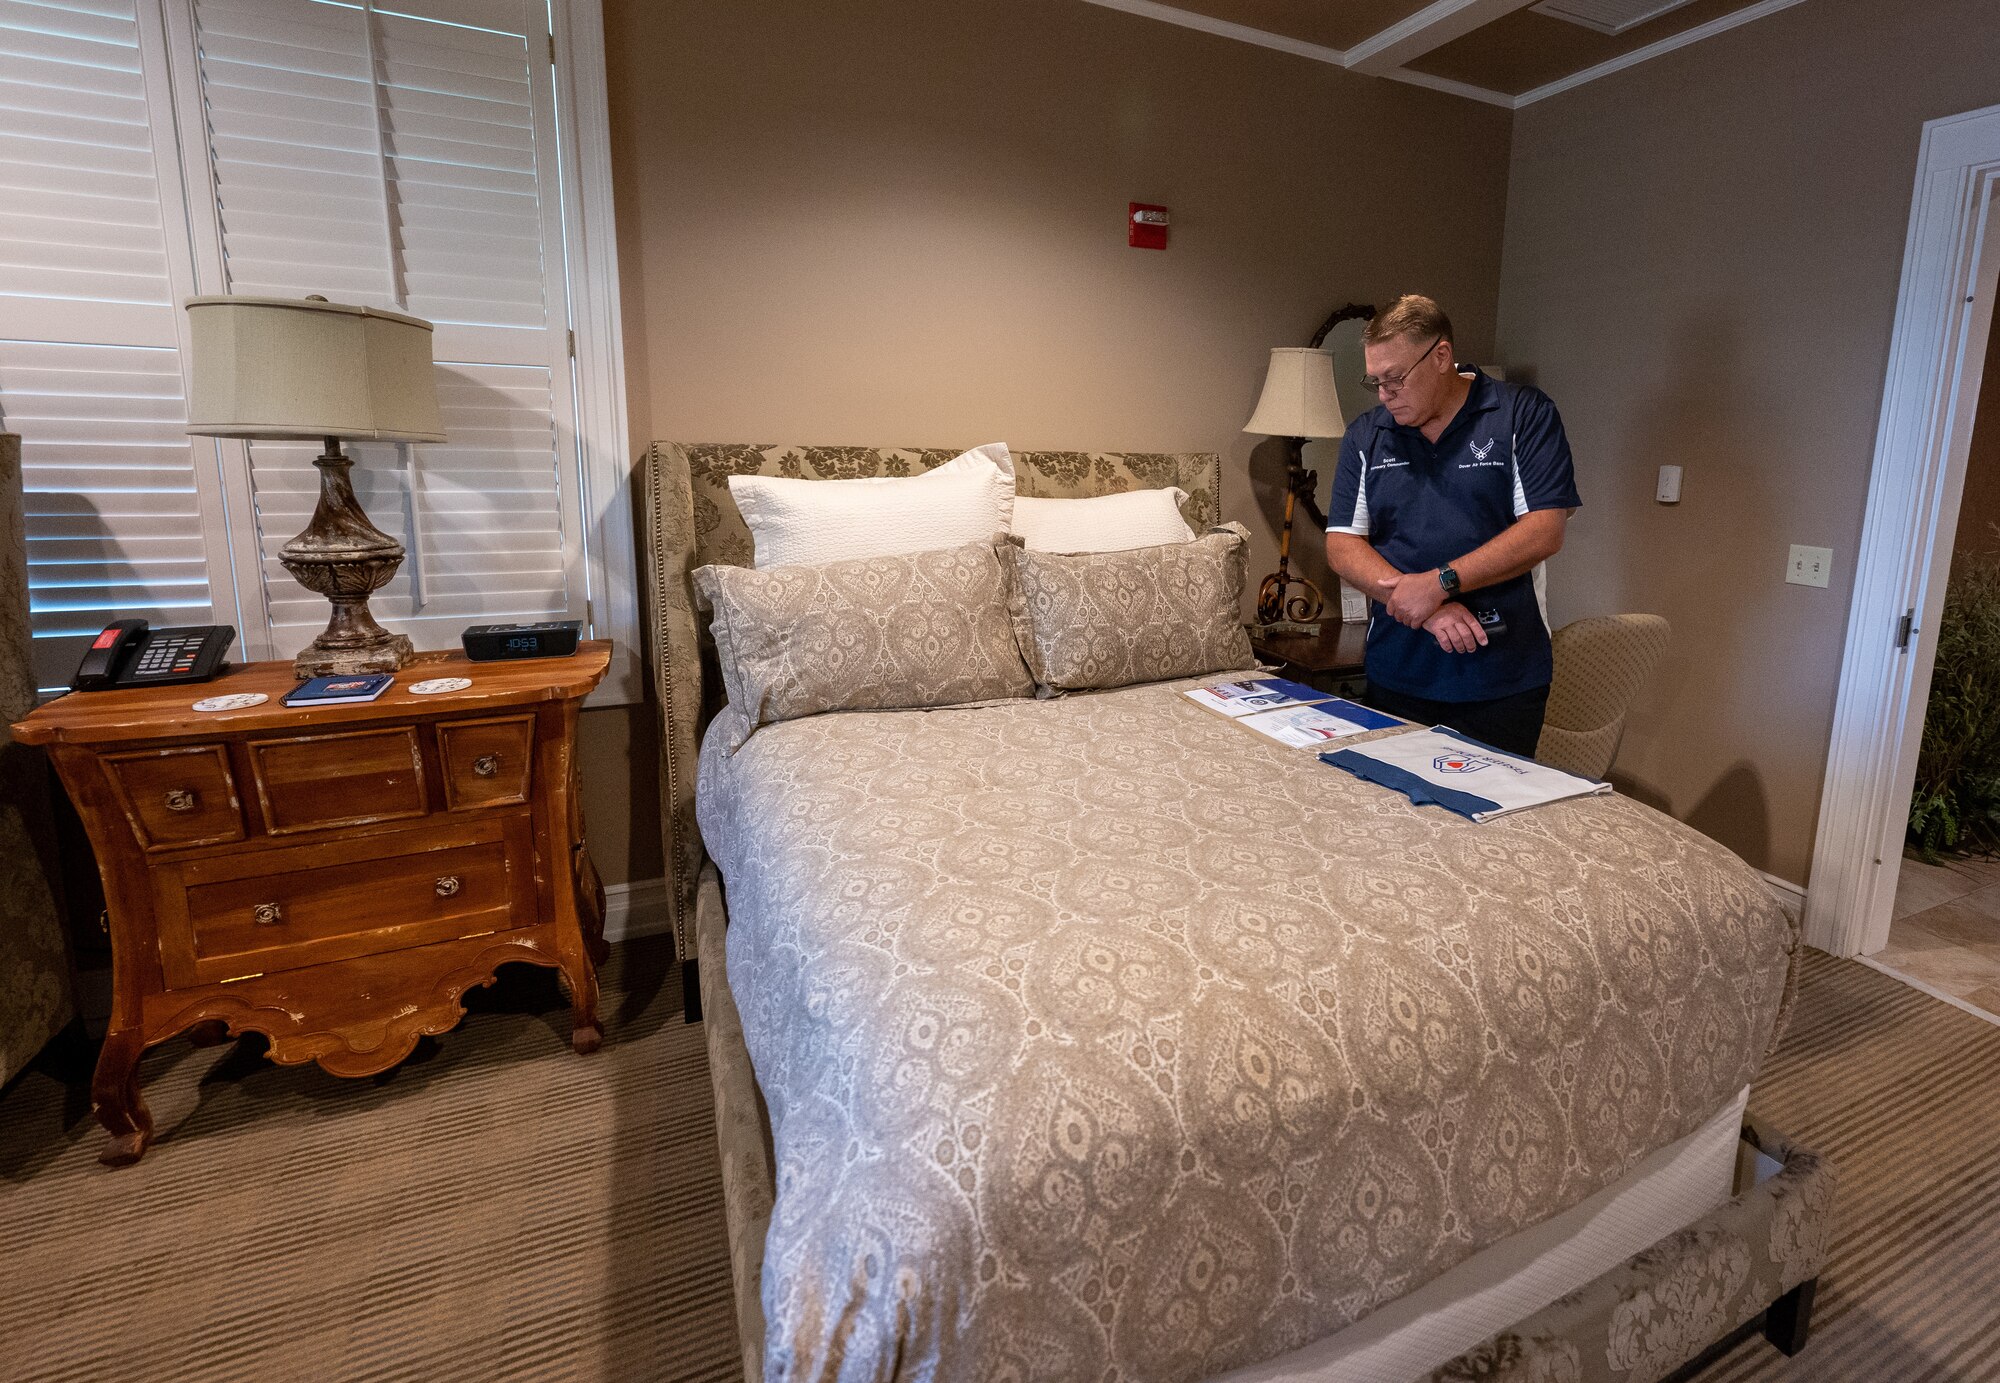 Scott Connell, 436th Operations Support Squadron honorary commander, views the welcome material for families that stay at the Dover Fisher House at Dover Air Force Base, Delaware, July 22, 2022. The Dover AFB Honorary Commanders program helps members of the community understand the importance of the base’s and the Air Force's mission. (U.S. Air Force photo by Jason Minto)